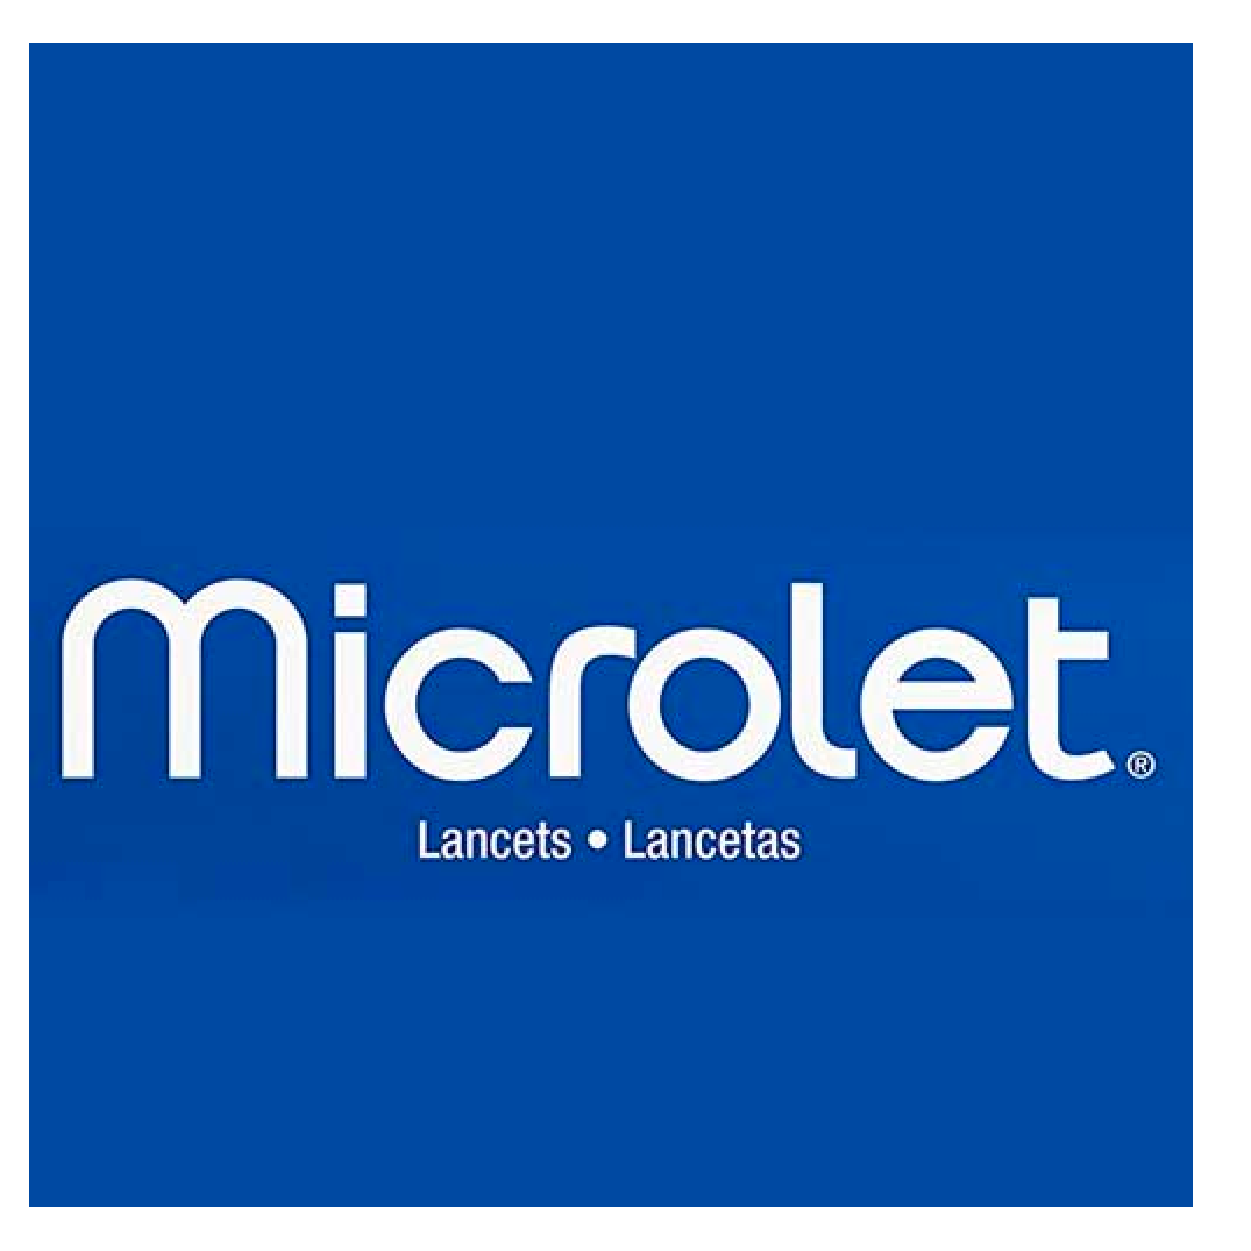 Microlet